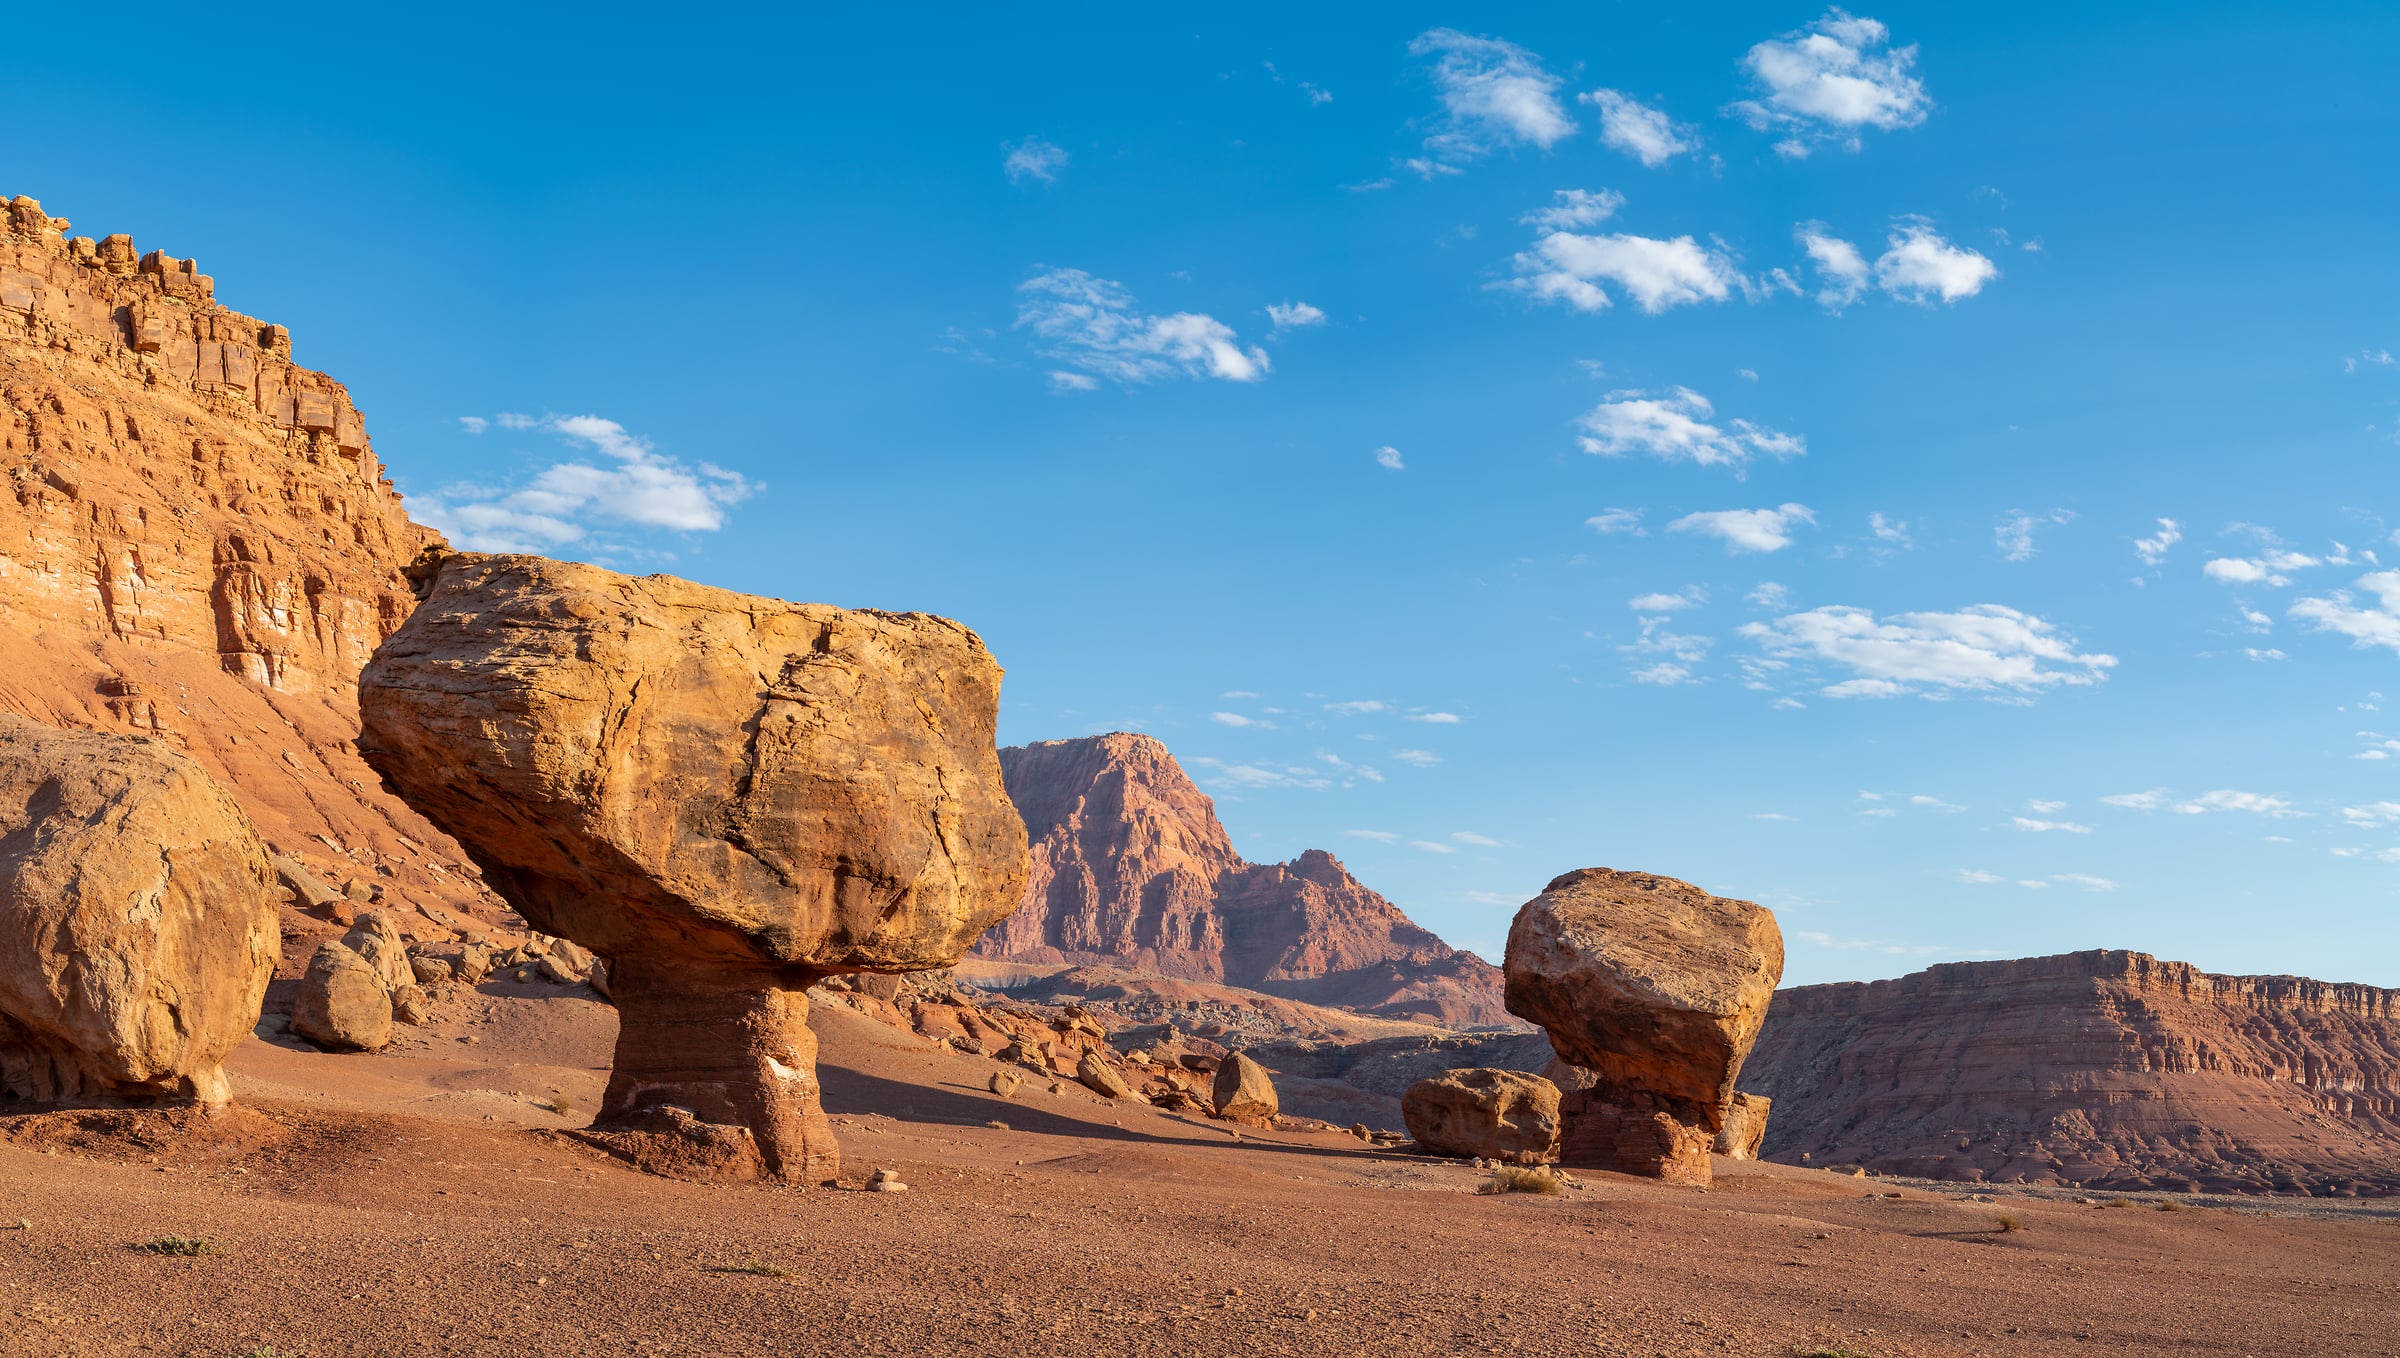 266 megapixels! "Balanced Boulders III" - A very high resolution, large-format VAST photo print of rock formations; photograph created by Greg Probst.